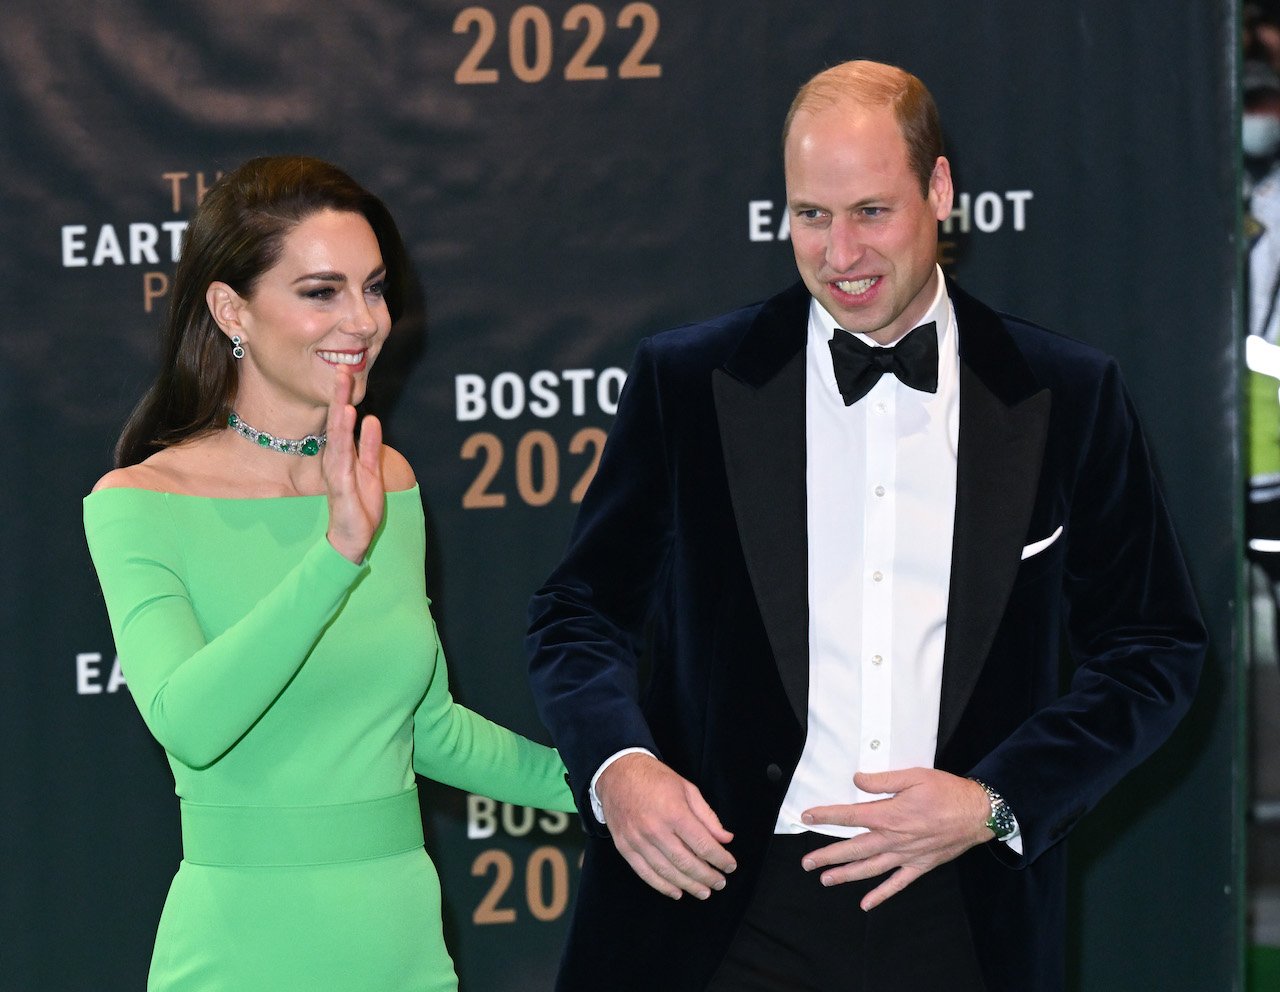 'Utterly delightful' Prince William, Prince of Wales, and Kate Middleton, Princess of Wales attend the Earthshot Prize Awards on day 3 of their Royal Tour of Boston on 2nd December 2022, in Boston, Massachusetts, USA.